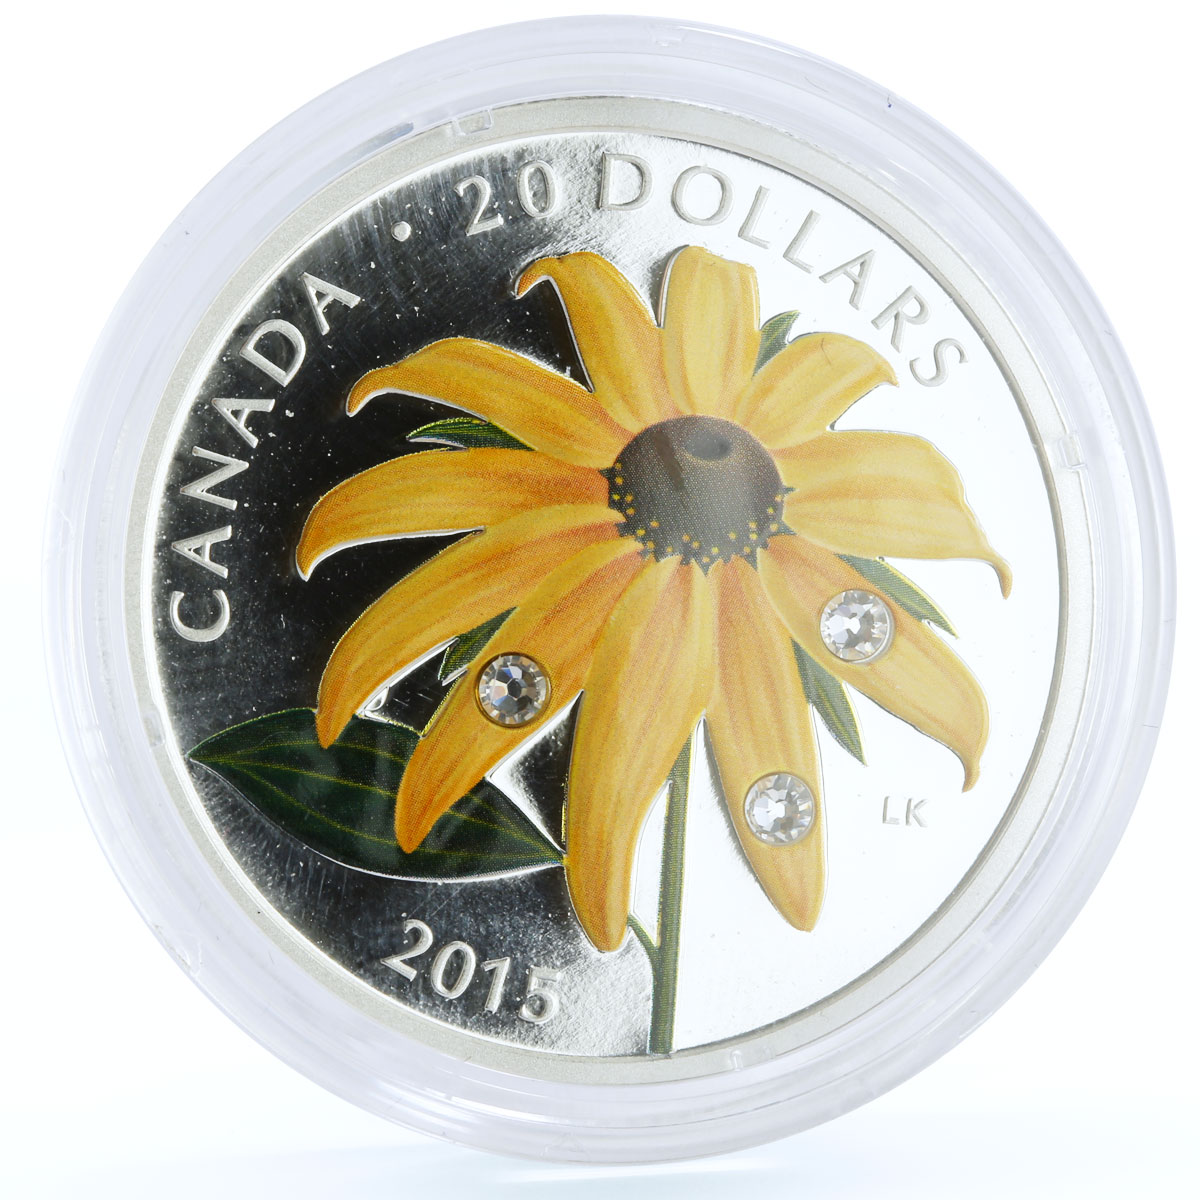 Canada 20 dollars Flora Black Eyed Susan Flower colored proof silver coin 2015